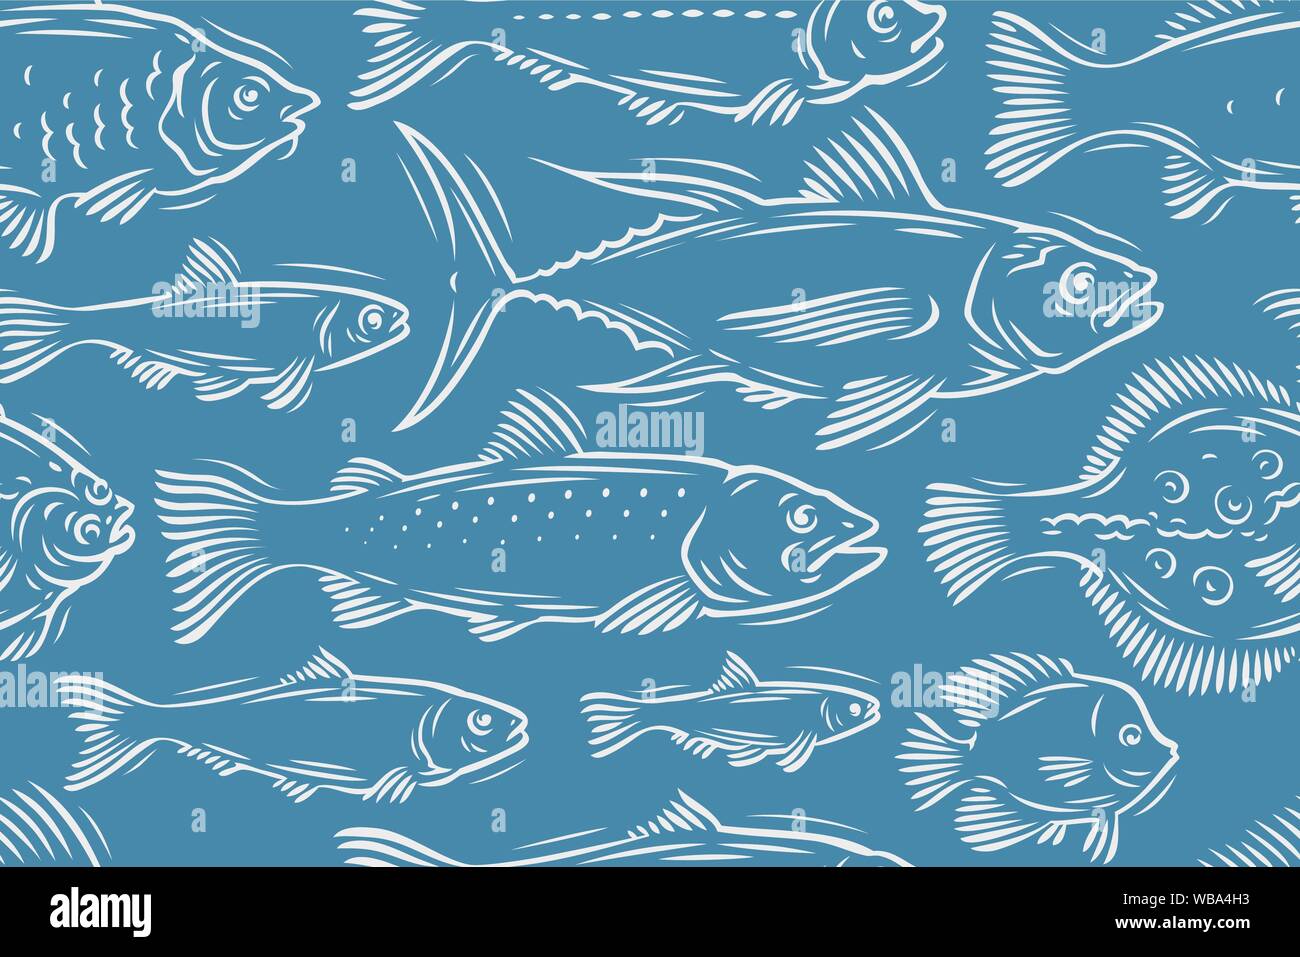 Fish seamless background. Underwater world, seafood vector illustration Stock Vector